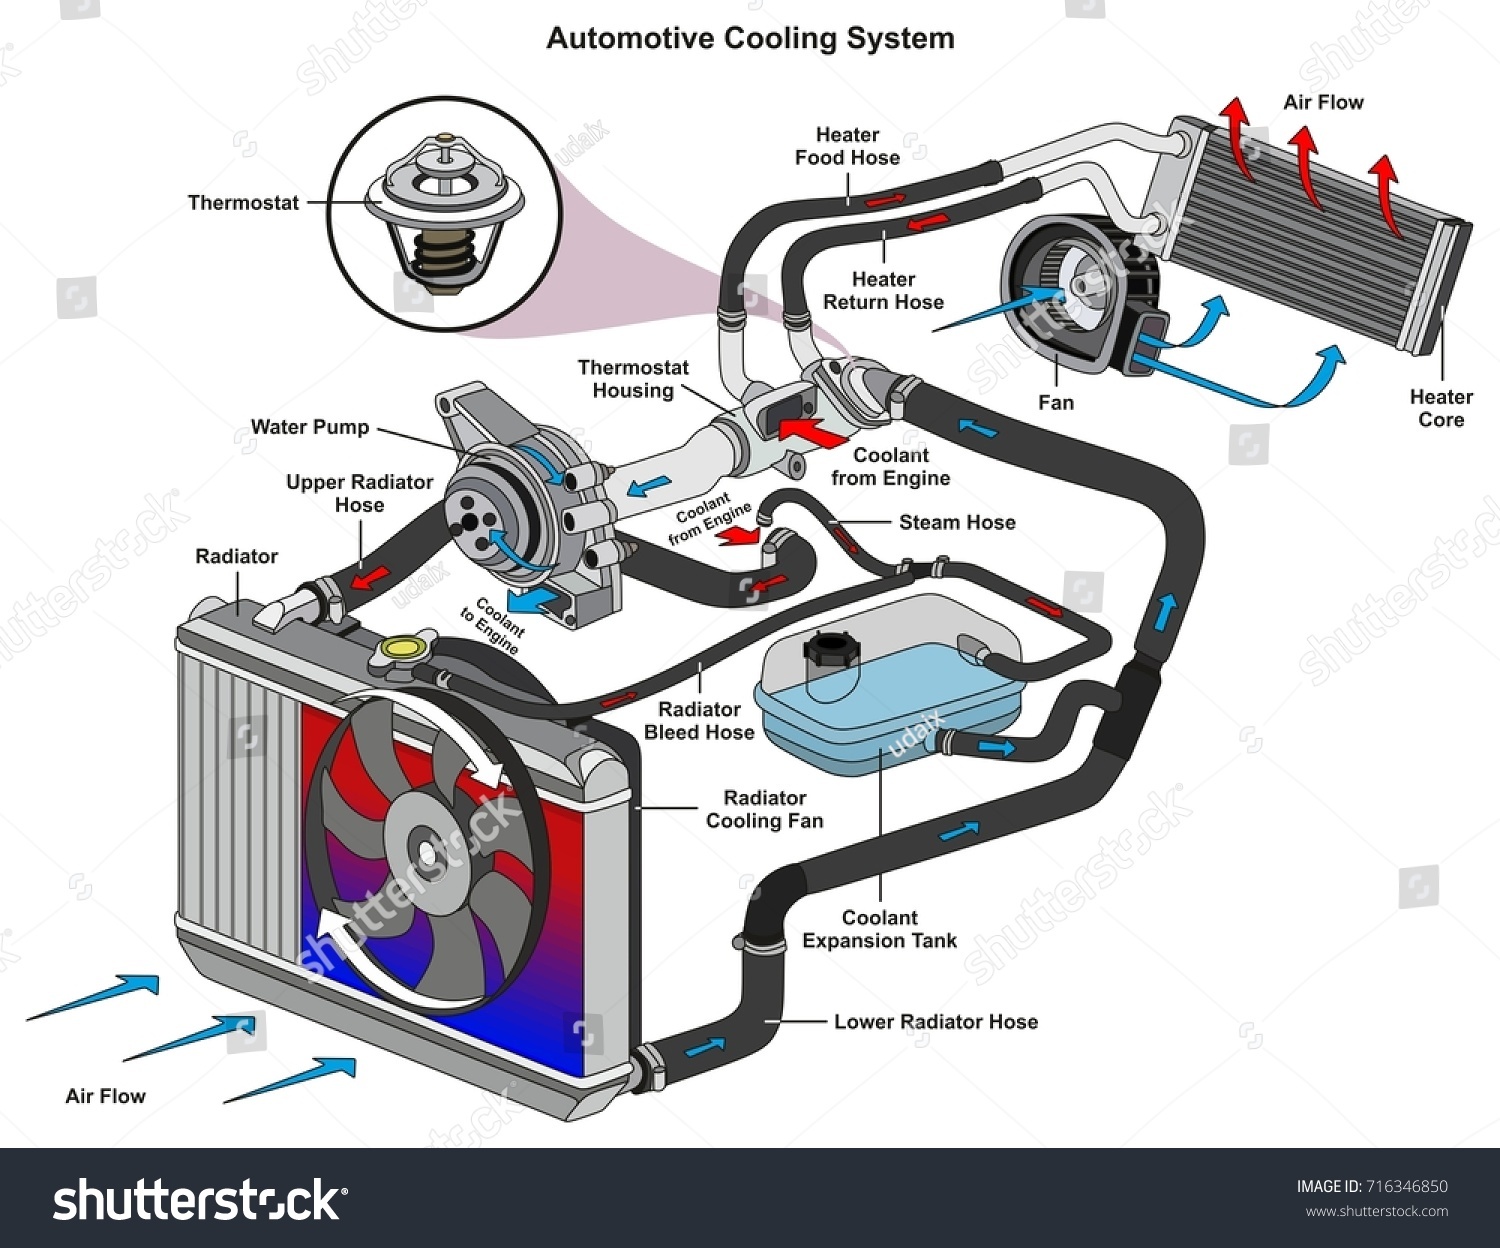 Automotive Cooling System Infographic Diagram Showing